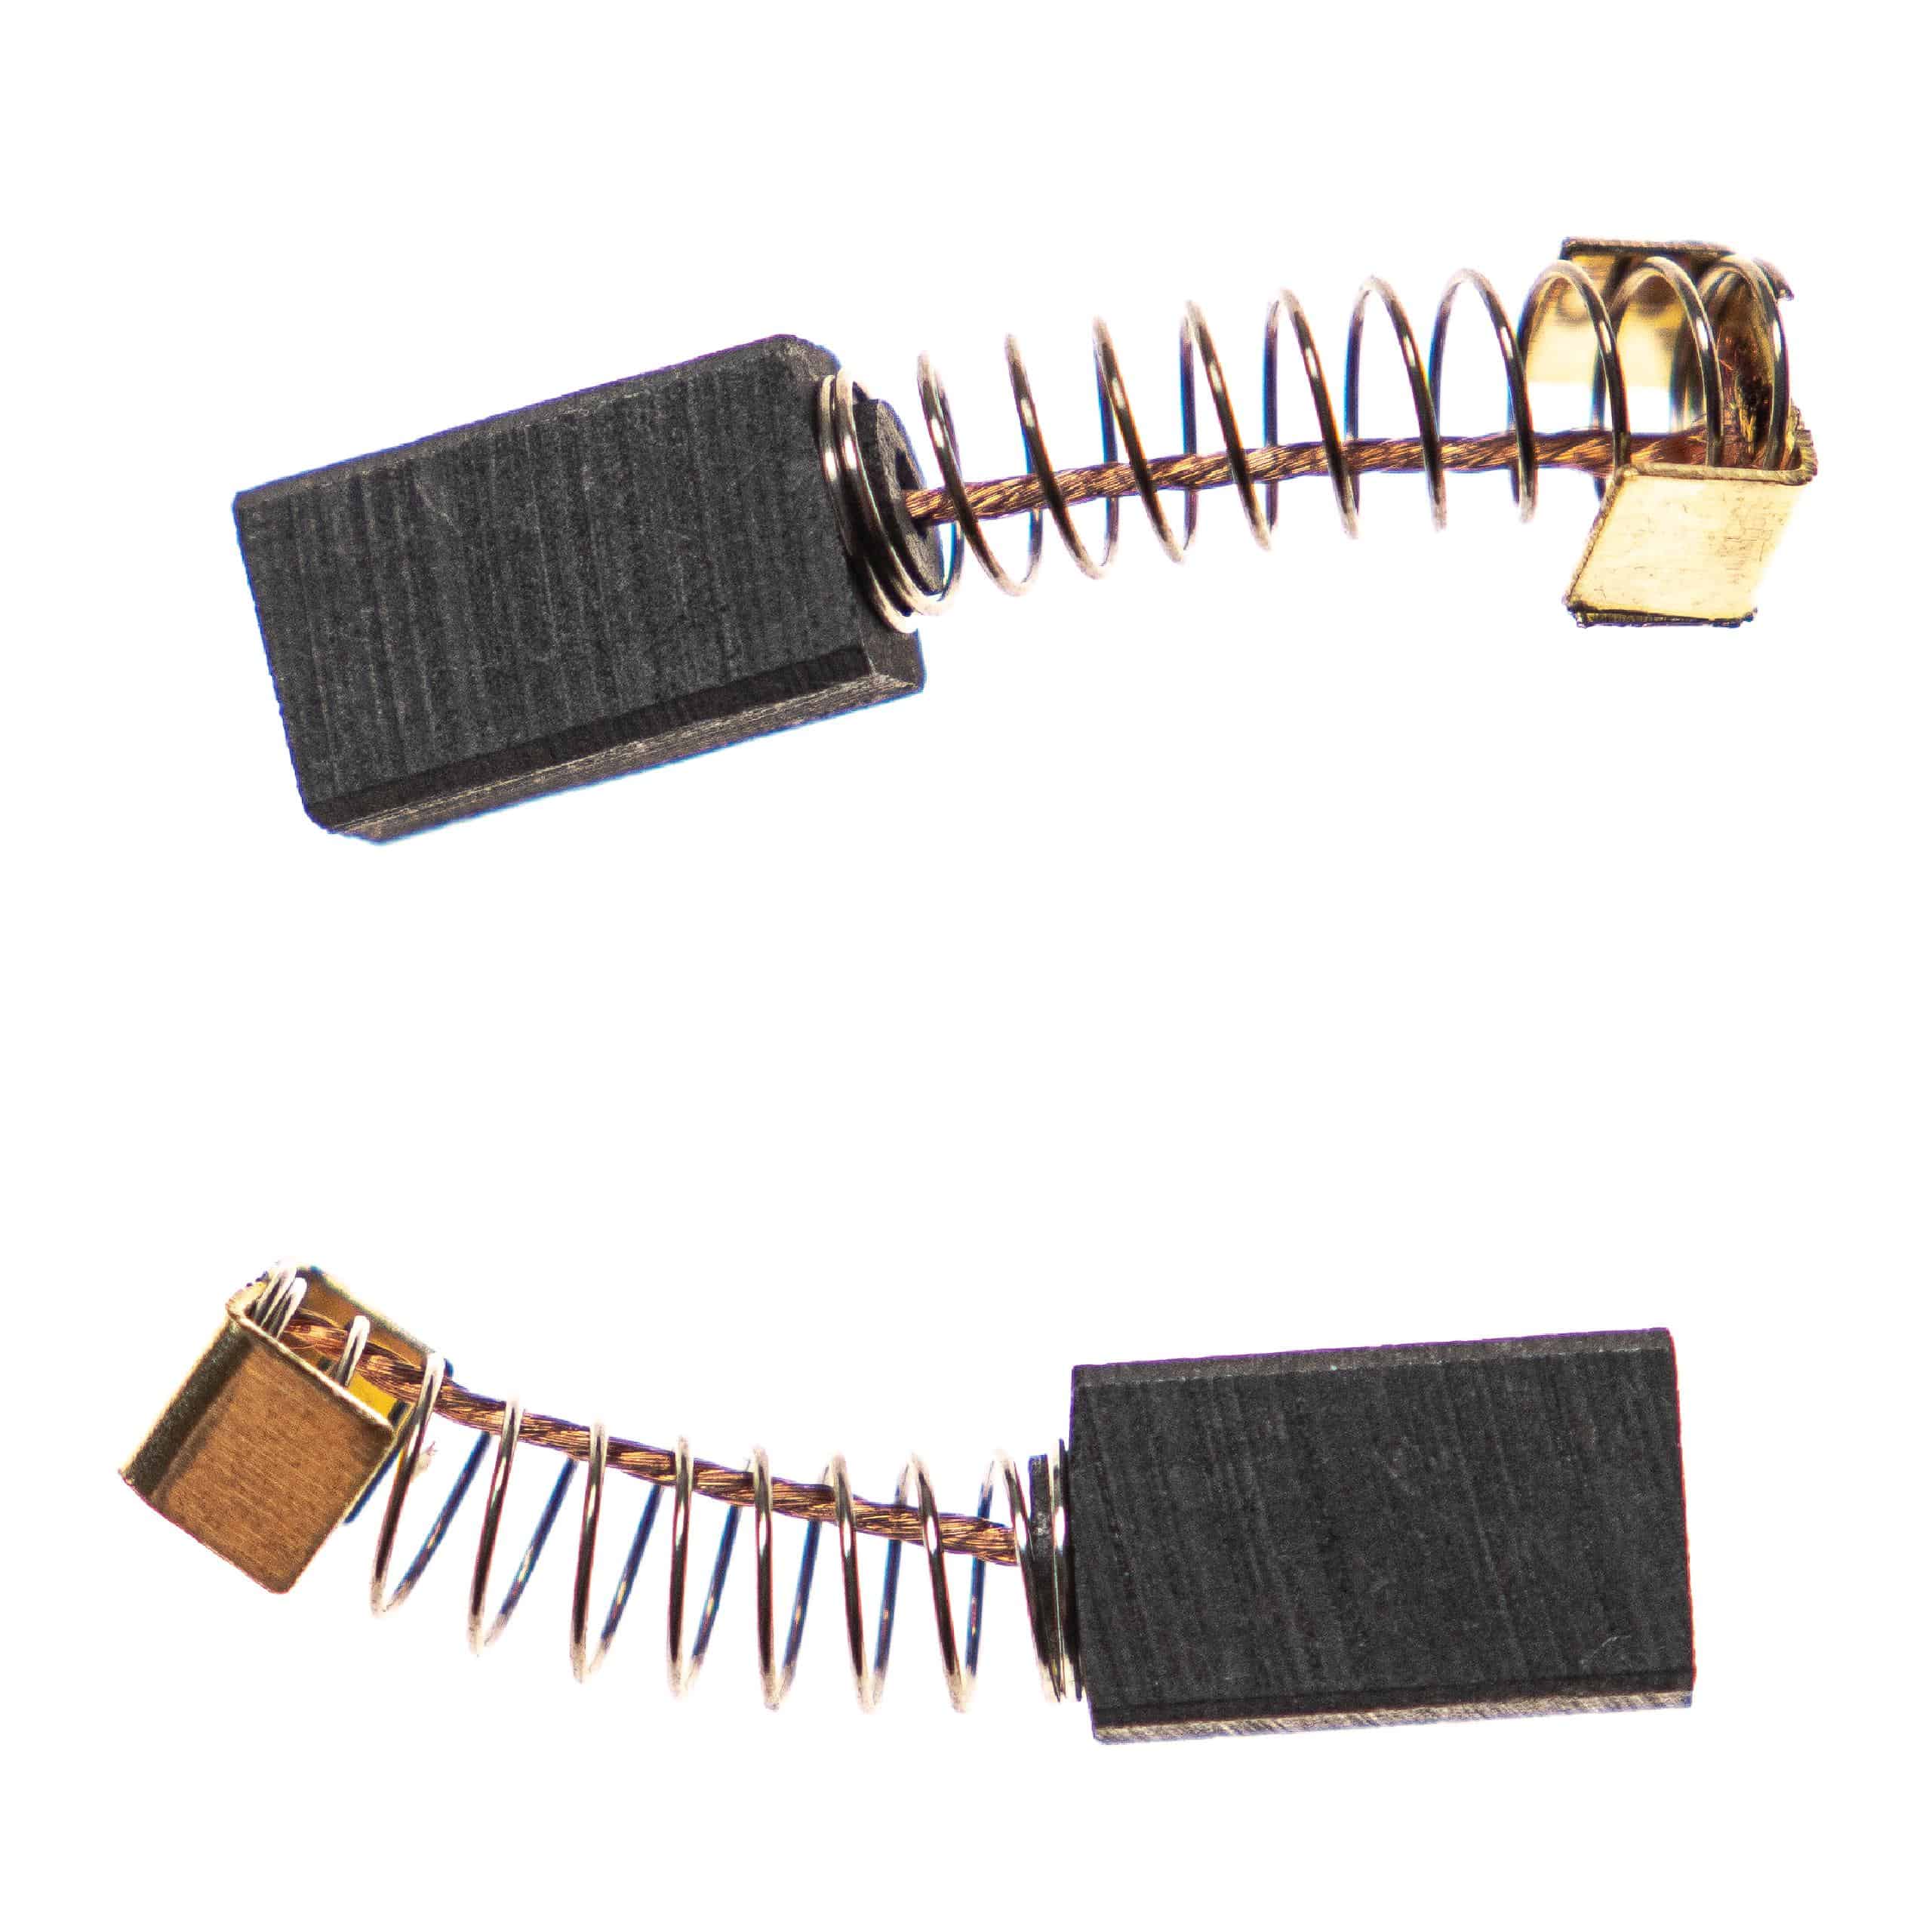 2x Carbon Brush as Replacement for Dremel 02-095, 2-615-296-770 Electric Power Tools + Spring, 14 x 8 x 6mm